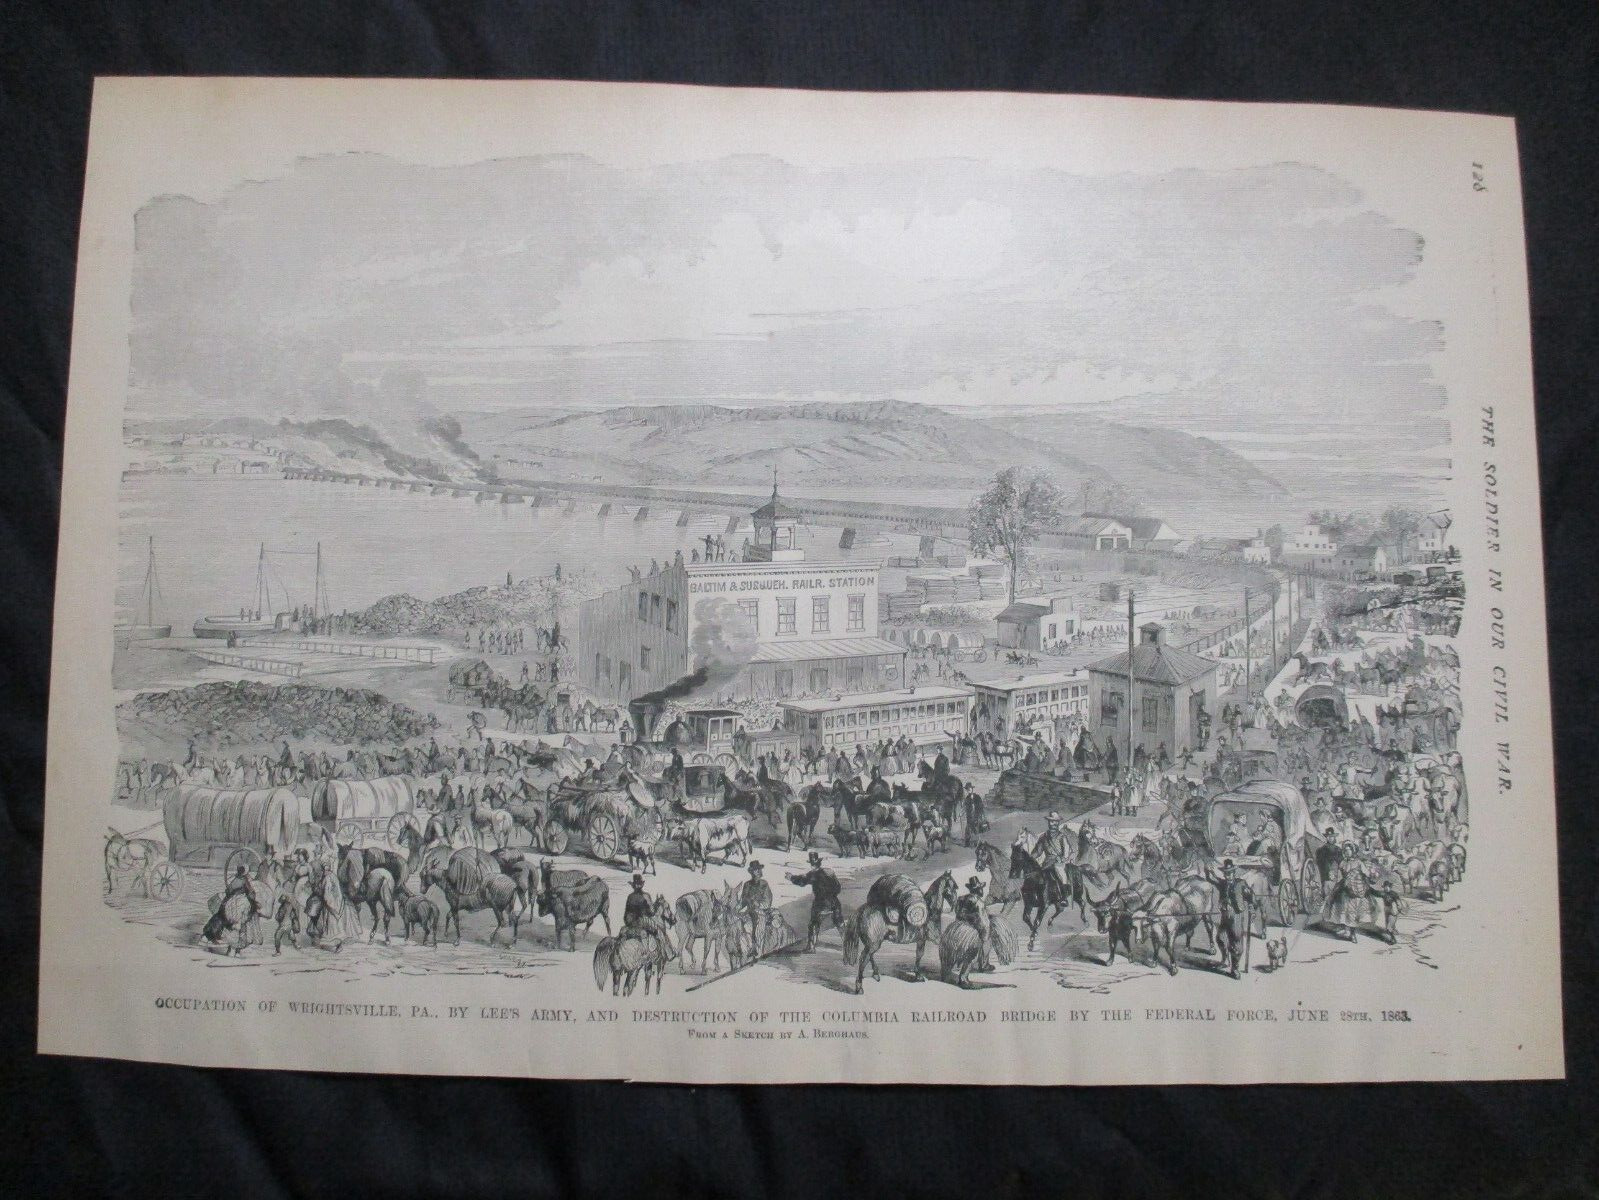 1885 Civil War Print - Occupation of Wrightsville, PA, By Lee's Army, June 1863